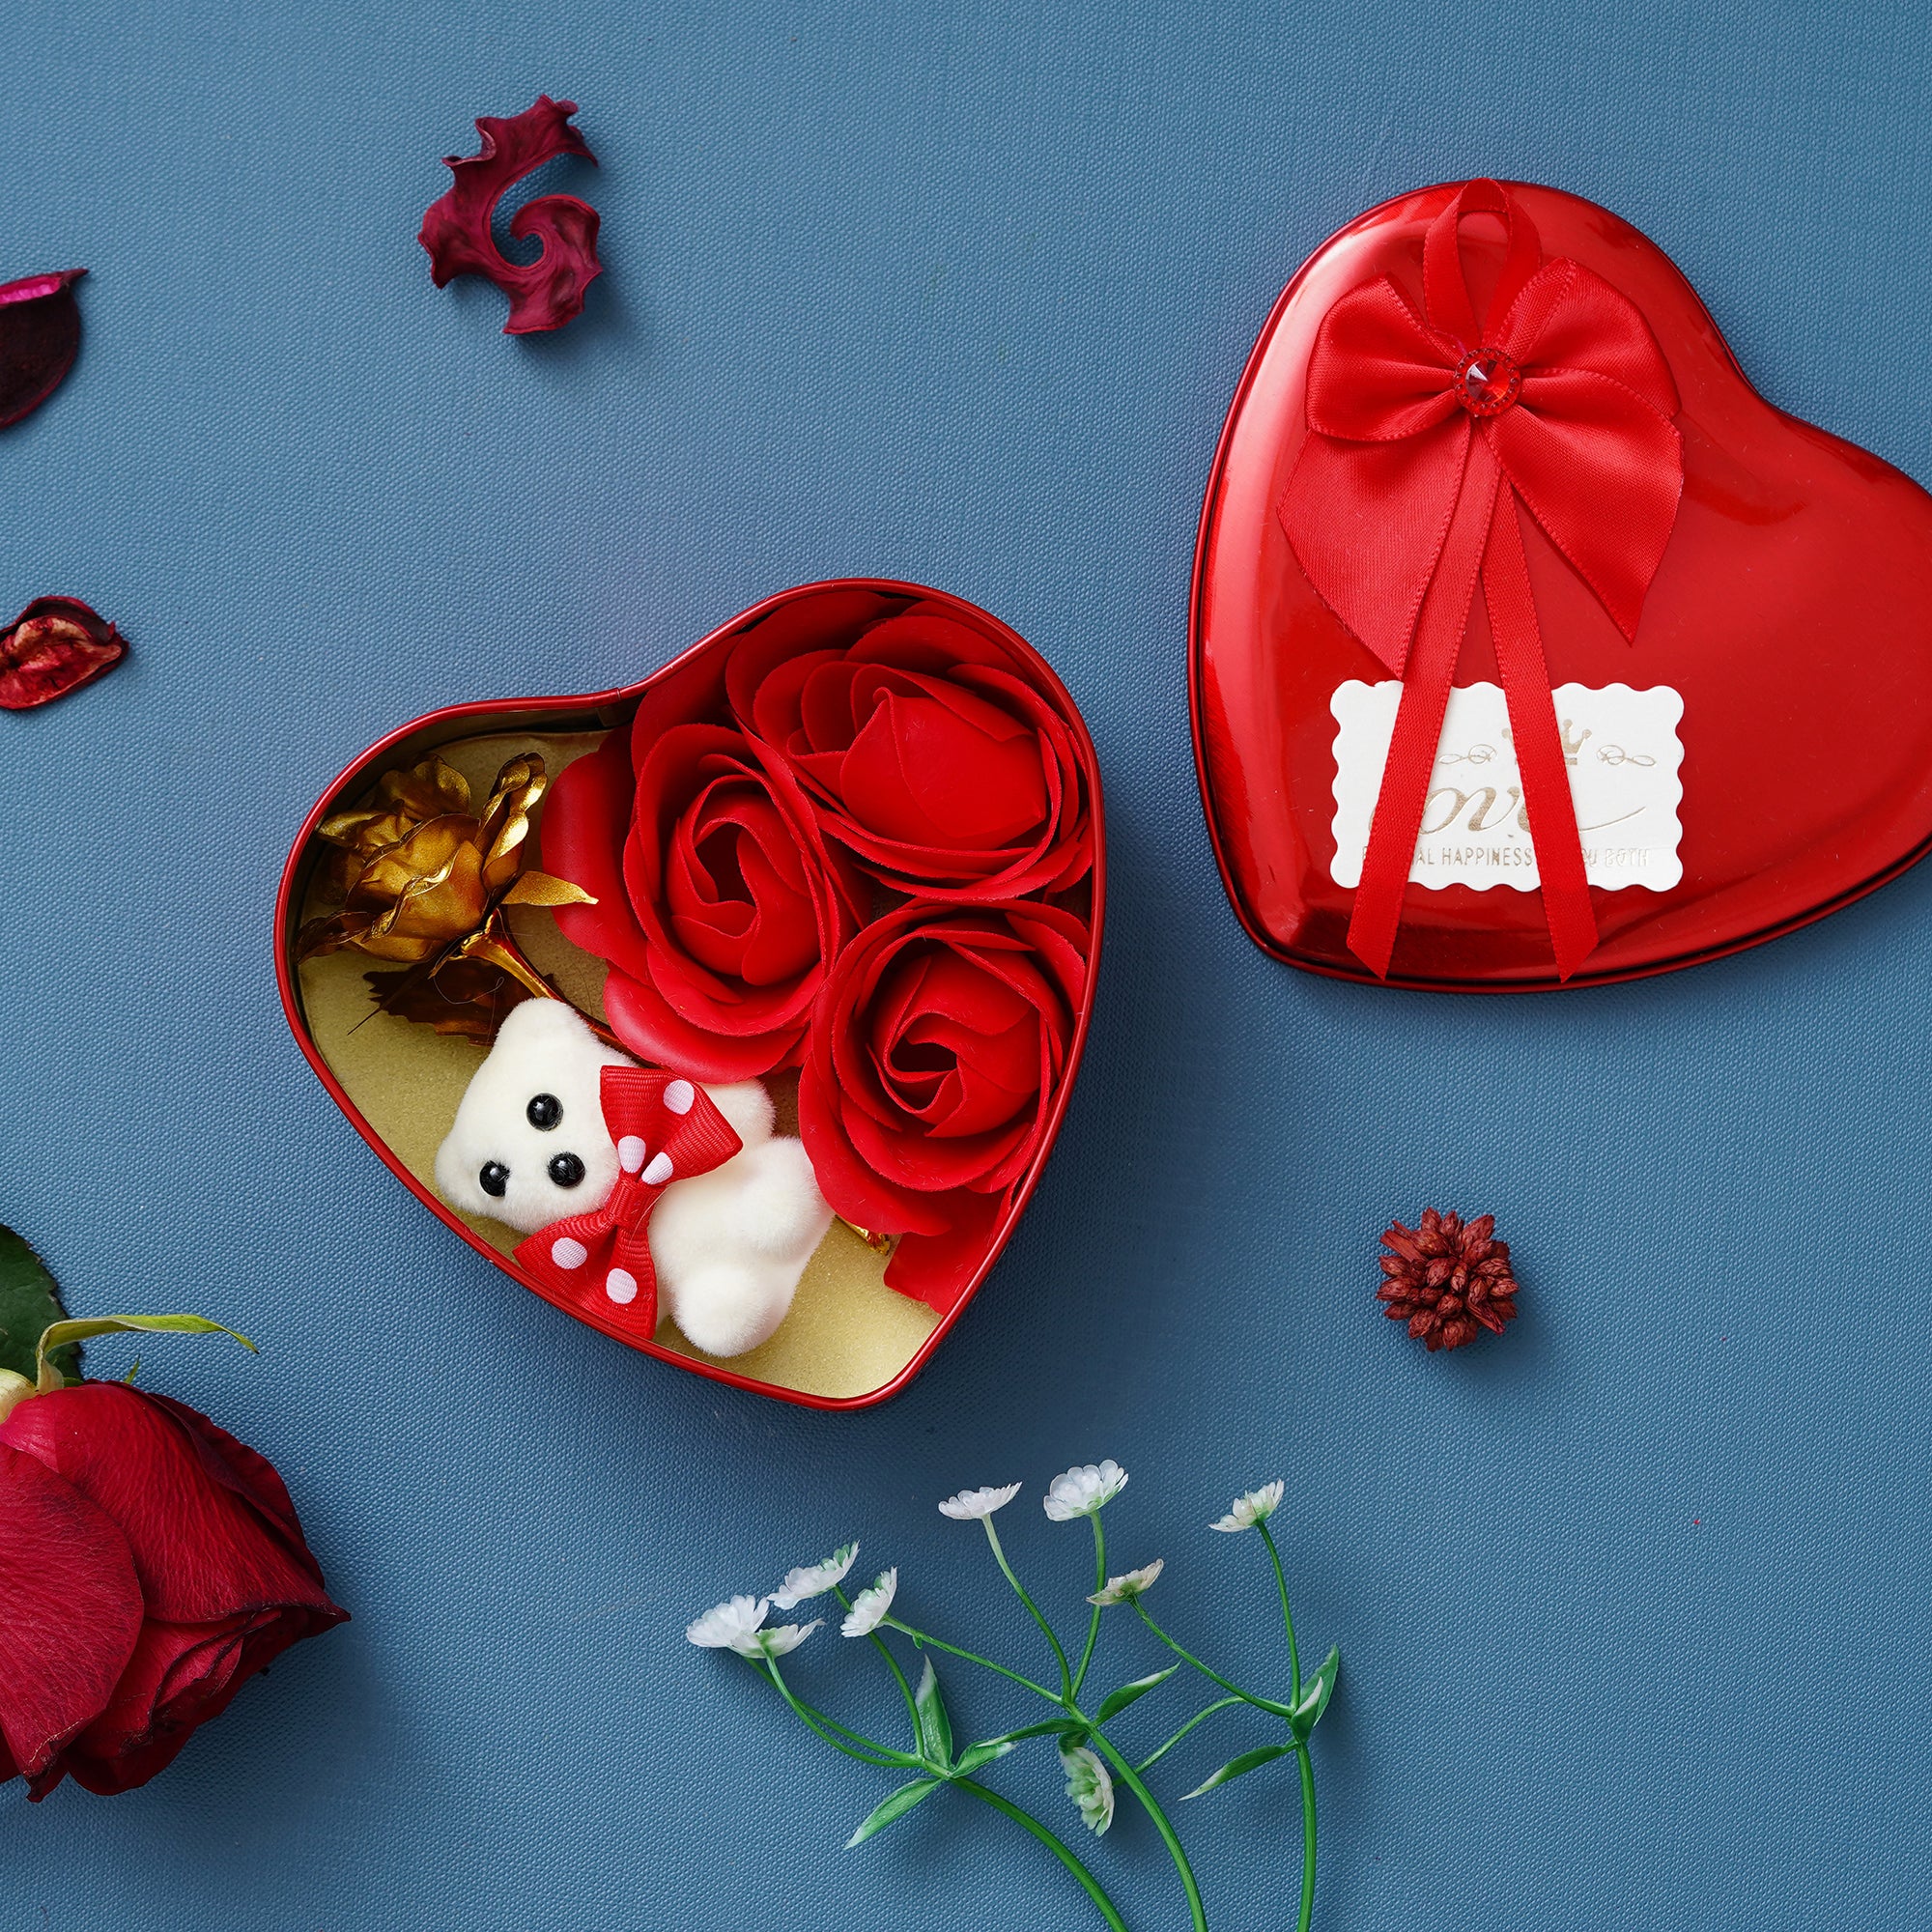 Red Heart Shaped Gift Box with 3 Red Roses, 1 Teddy Bear and 1 Golden Rose